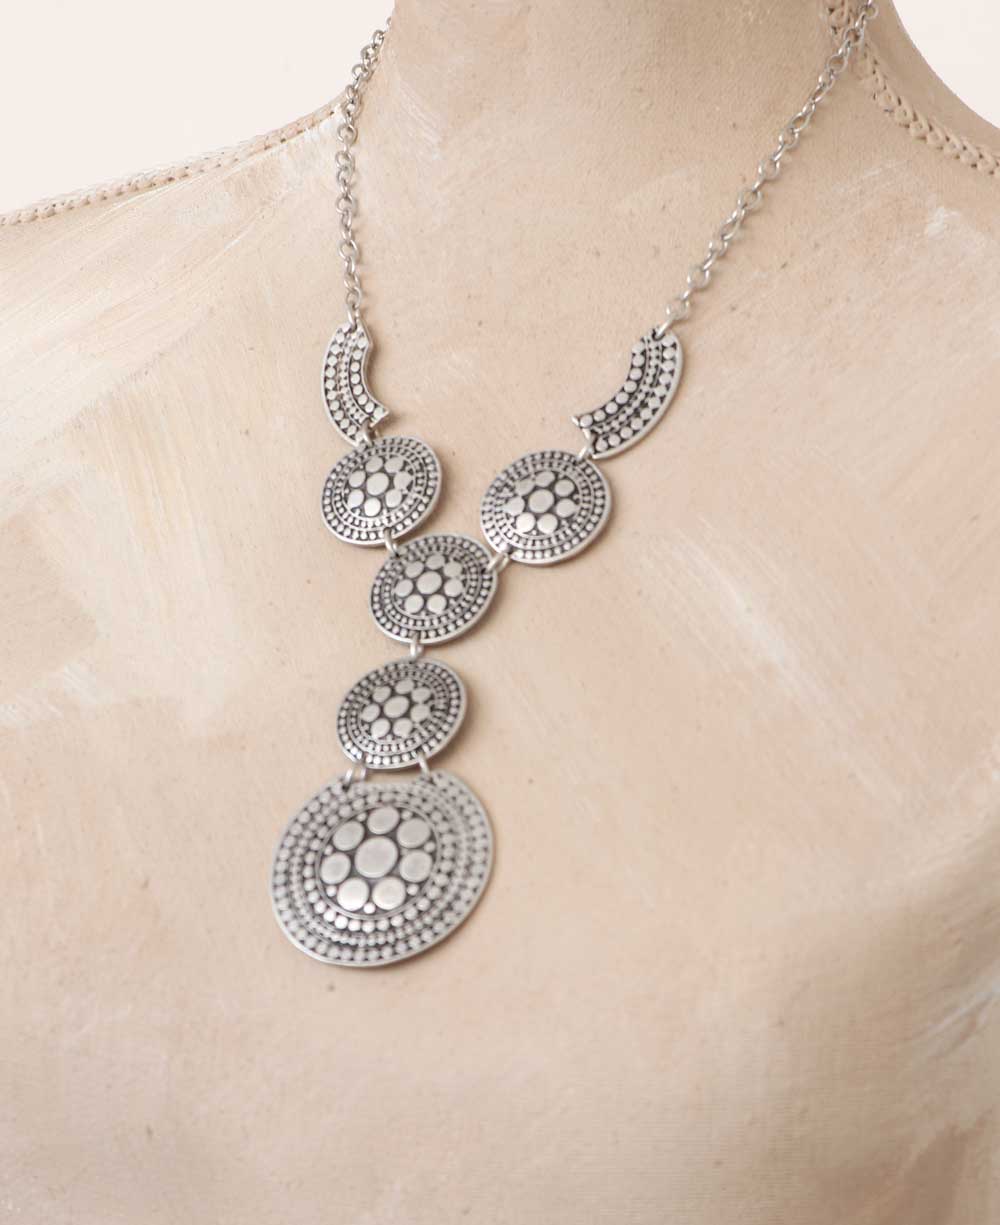 Handmade Pewter Necklace from Turkey